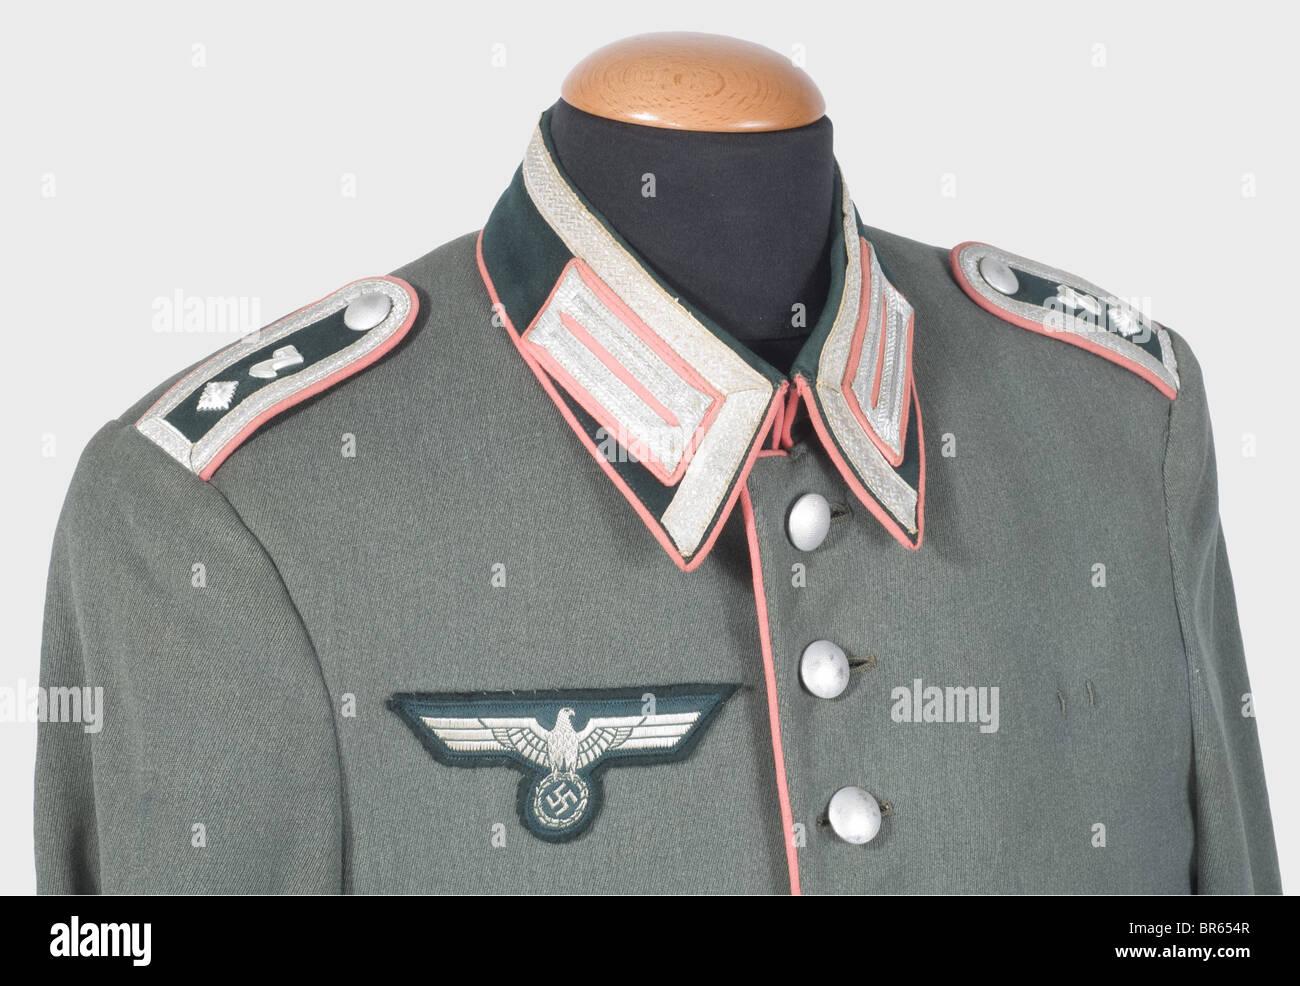 A dress uniform for a Feldwebel of the 7th Panzer Division., A field grey gabardine parade jacket with dark green collar and cuffs, pink coloured piping and collar patches (with silver lace), sewn-on shoulder boards, woven silver eagle on a dark green backing, green silk lining with a reinforced passage for a bayonet and the tailor's label, 'Eduard zum Felde - Eisenach', and a wearer's label in the inner pocket as a Lance Corporal in 1935. Long, stone grey trousers with pink coloured piping. Unfaded colour. The 7th Panzer Division, the so-called 'Ghost Division, Stock Photo